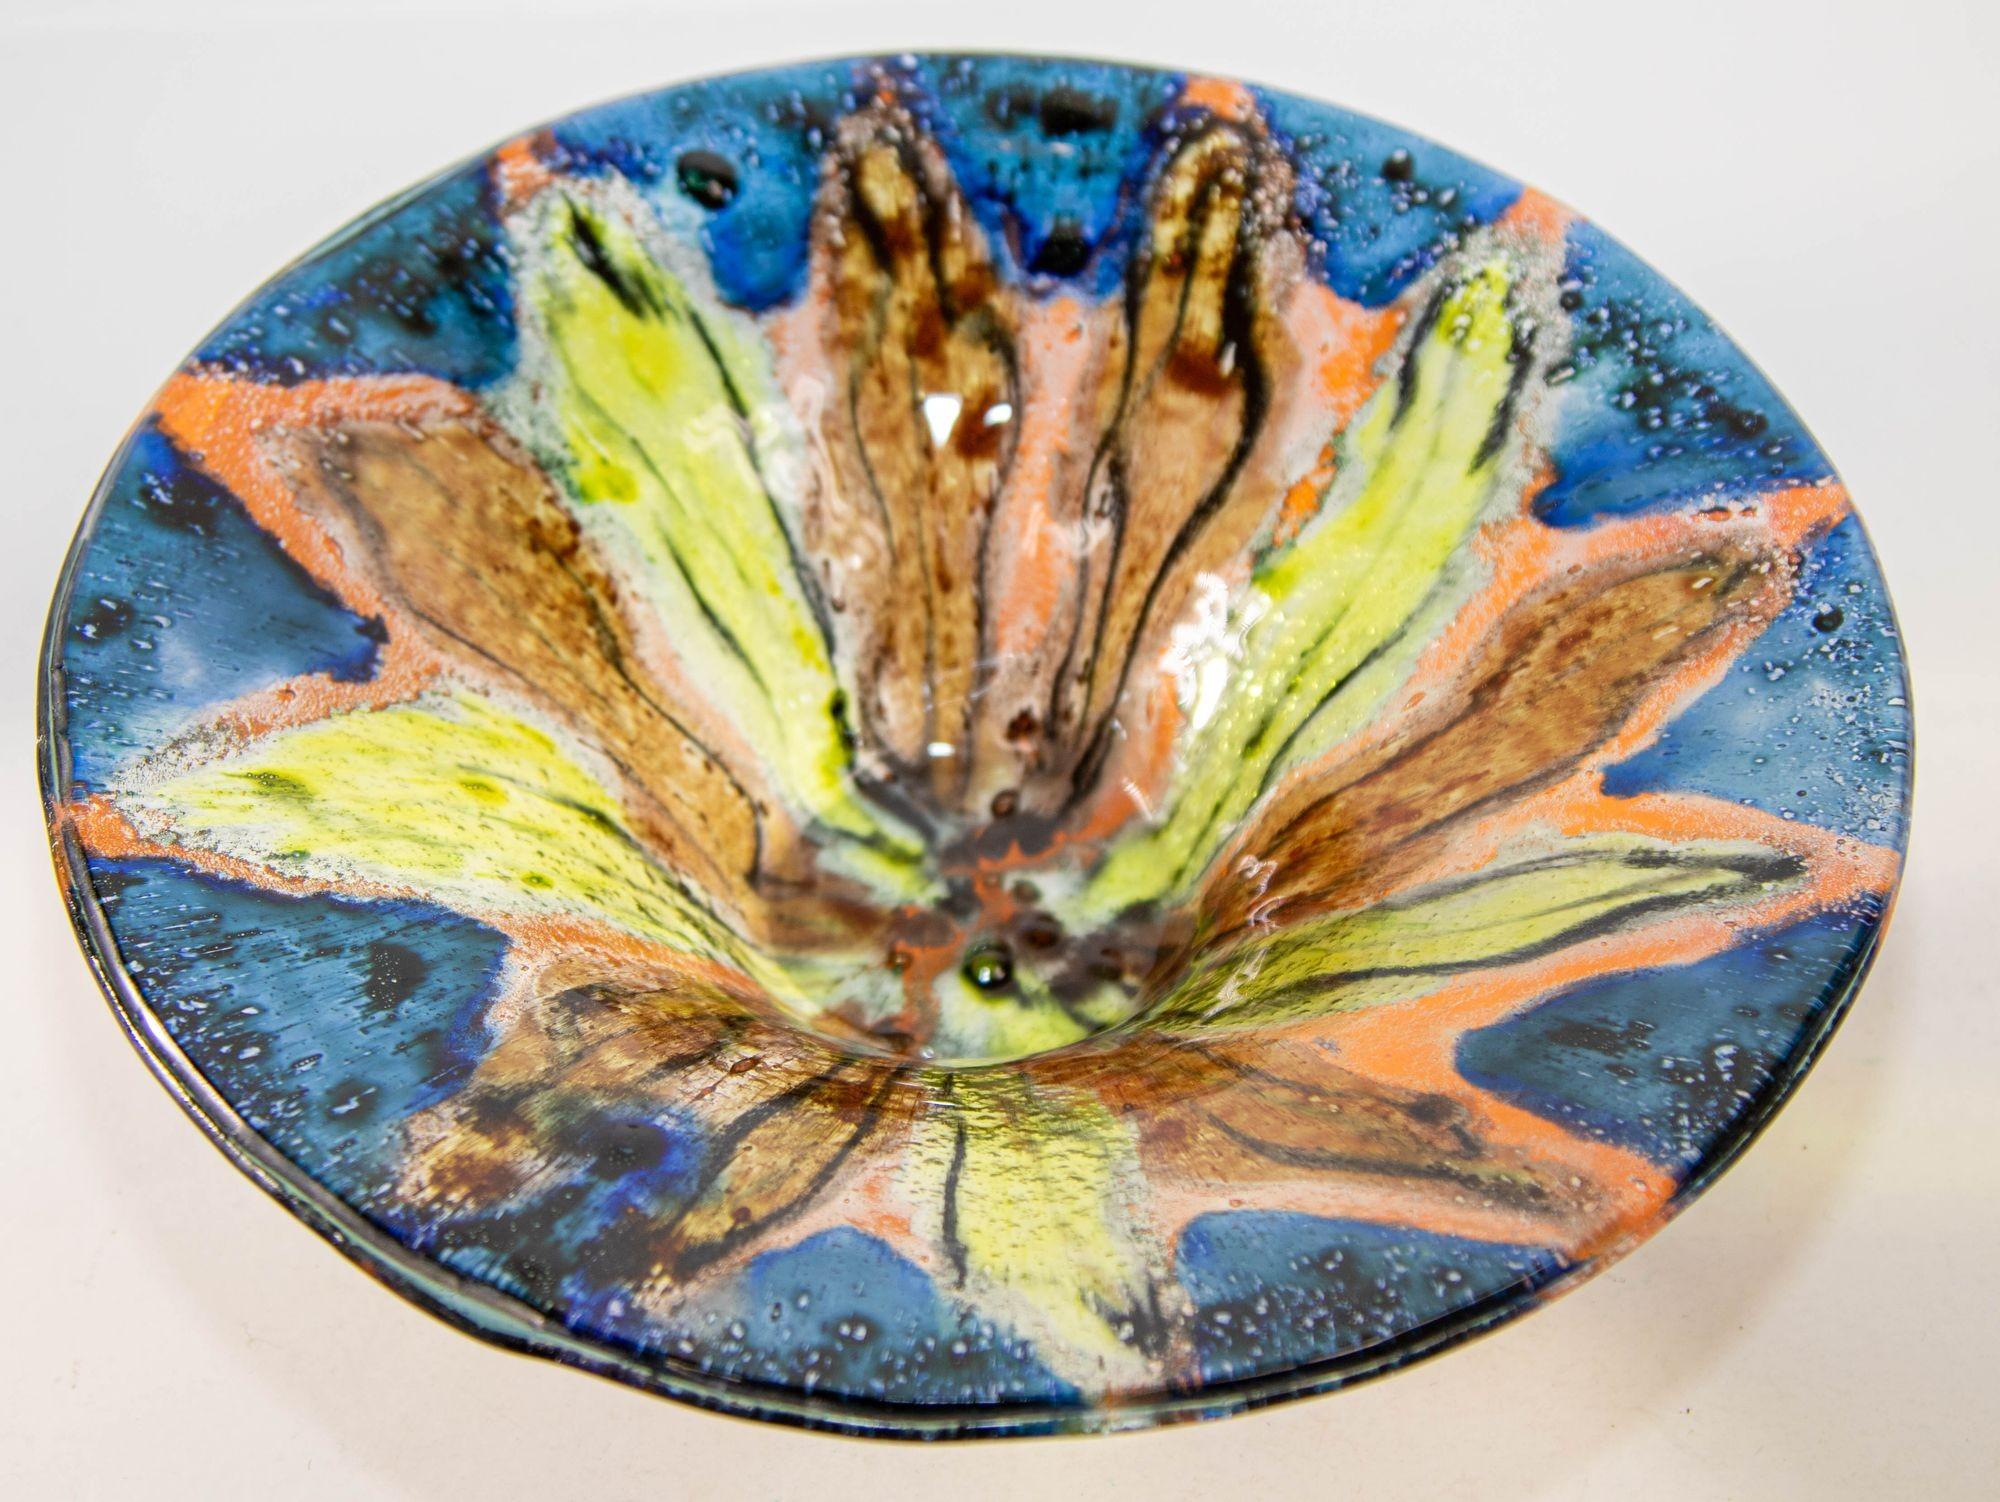 Vintage colorful abstract flower art glass plate.
Hand-crafted multi-color fused stained glass festive sunburst bowl.
Splash starburst hand blown art glass bowl, in the pictures you can see the deep shape and glazing of the sunburst bowl. 
The